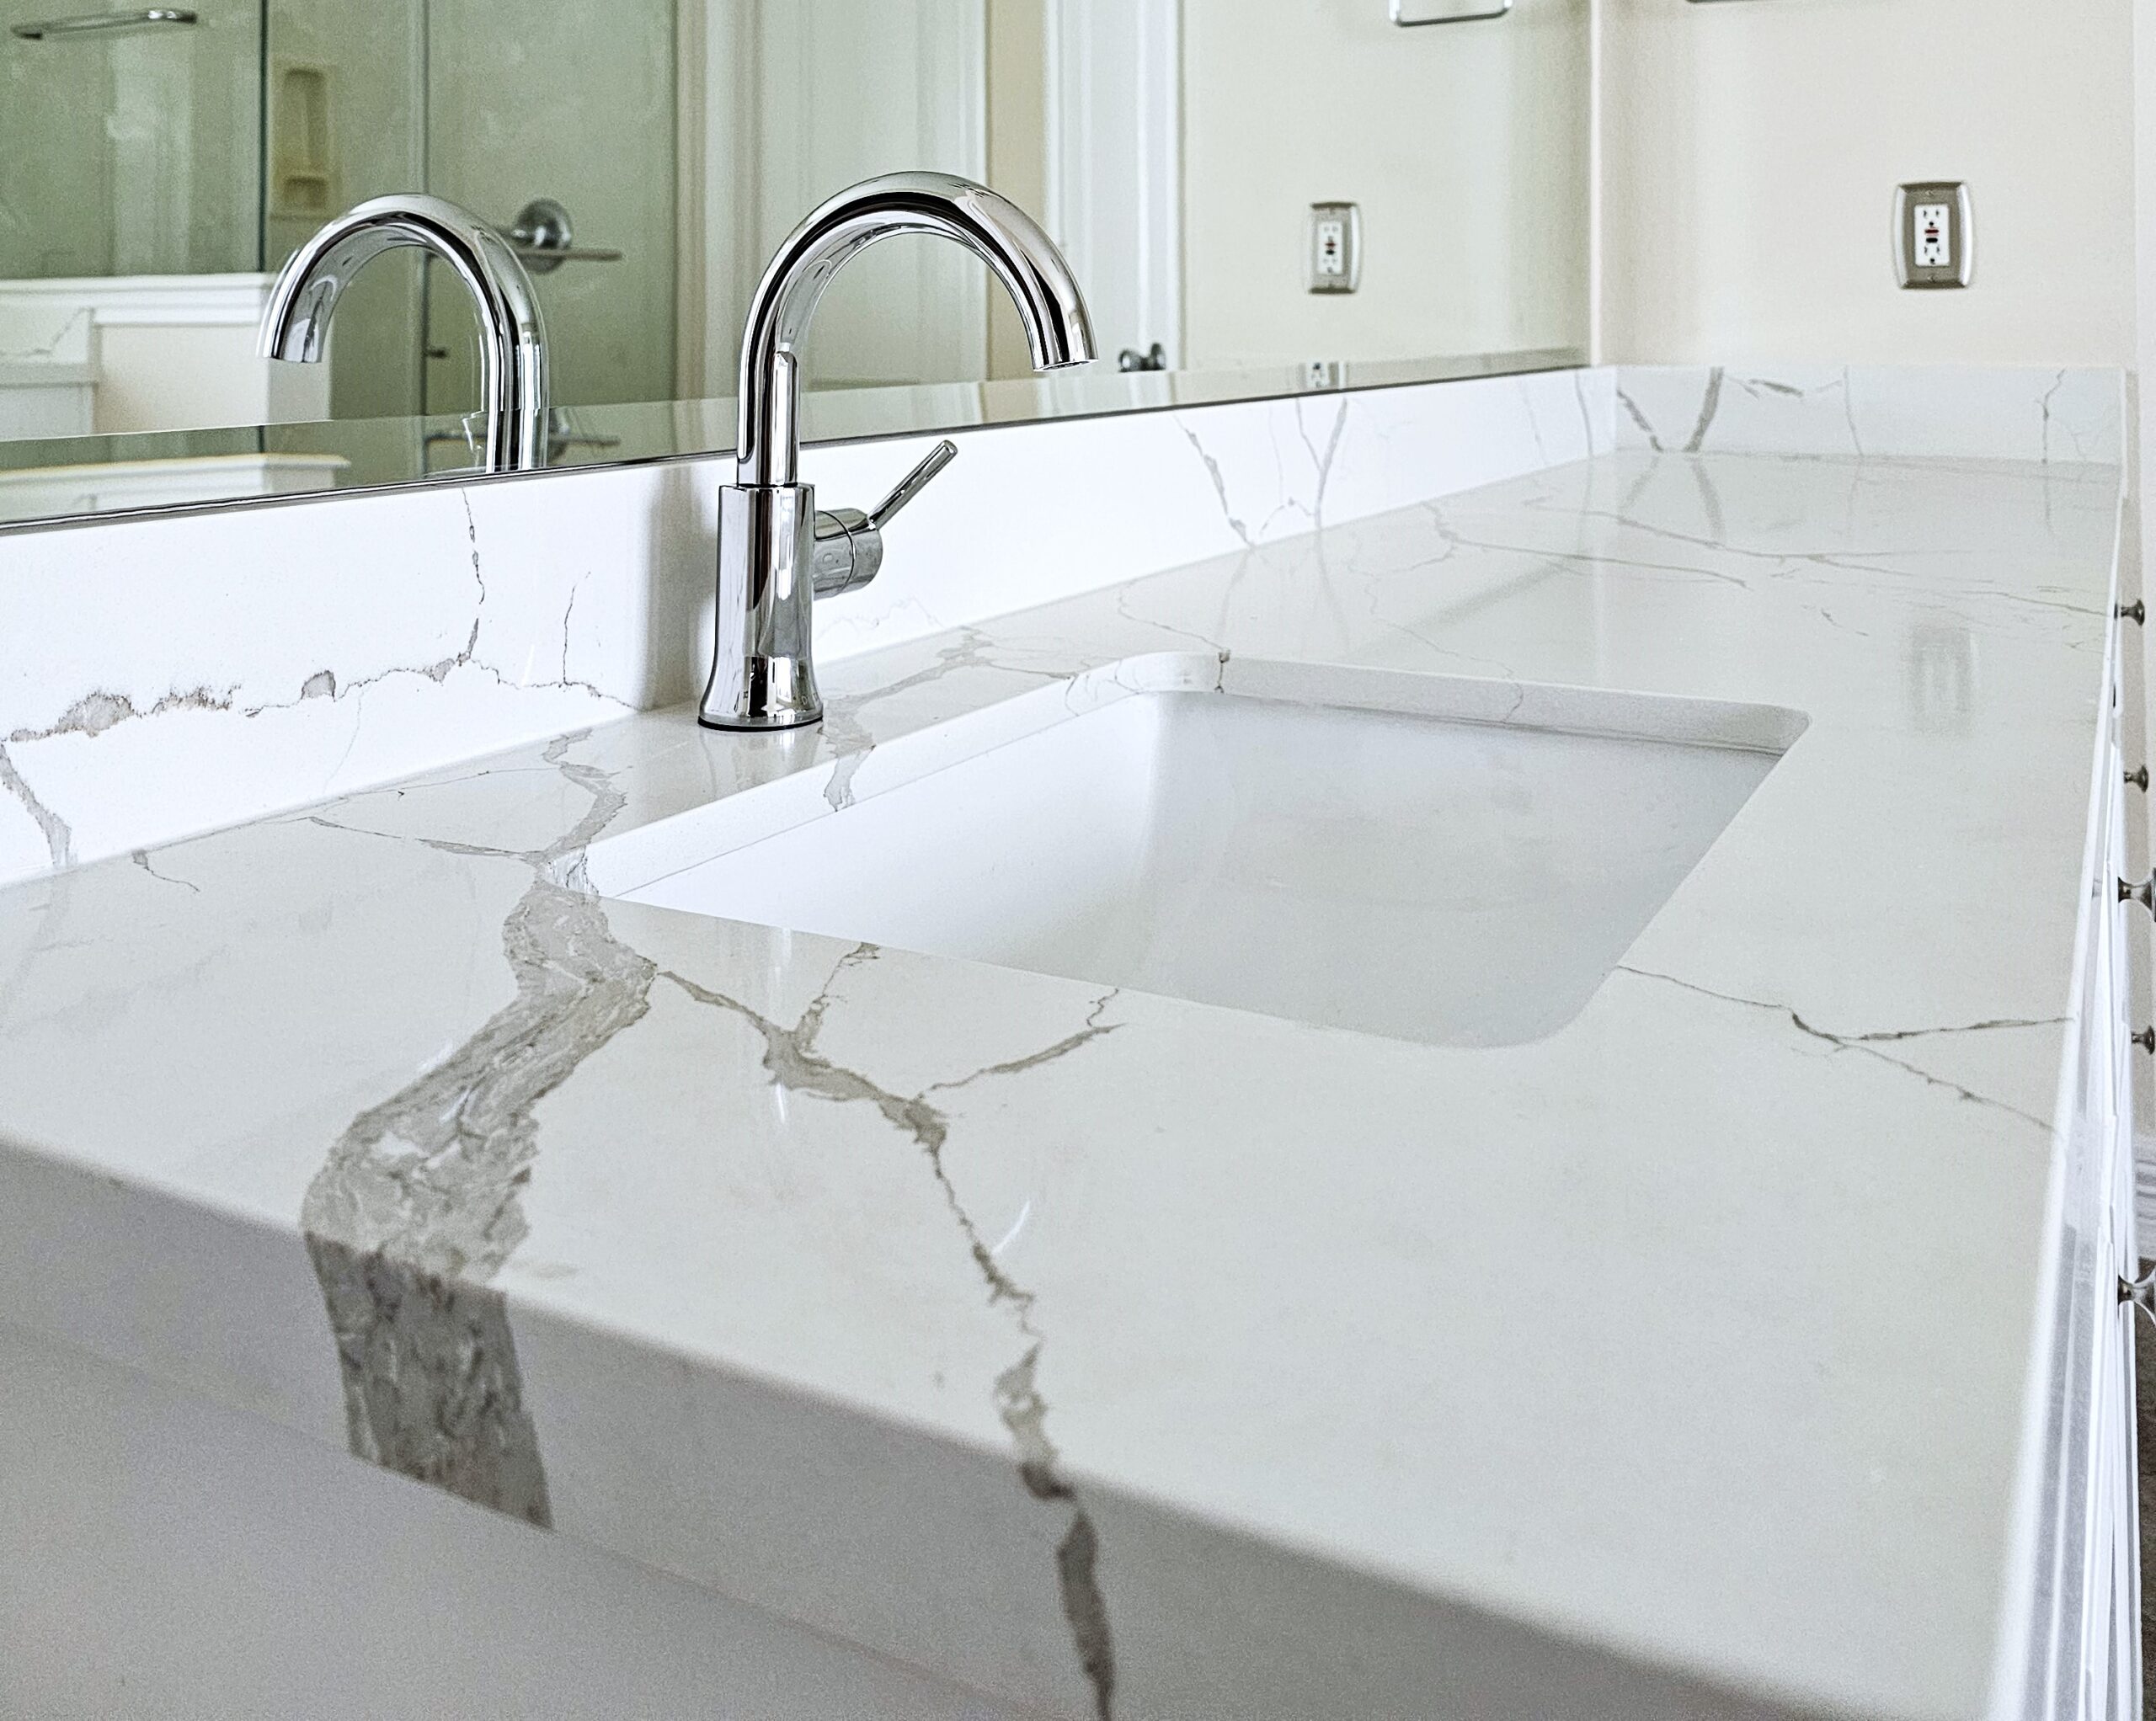 Marble-Look Quartz Countertop With Porcelain Undermount Sink, Installed 2023